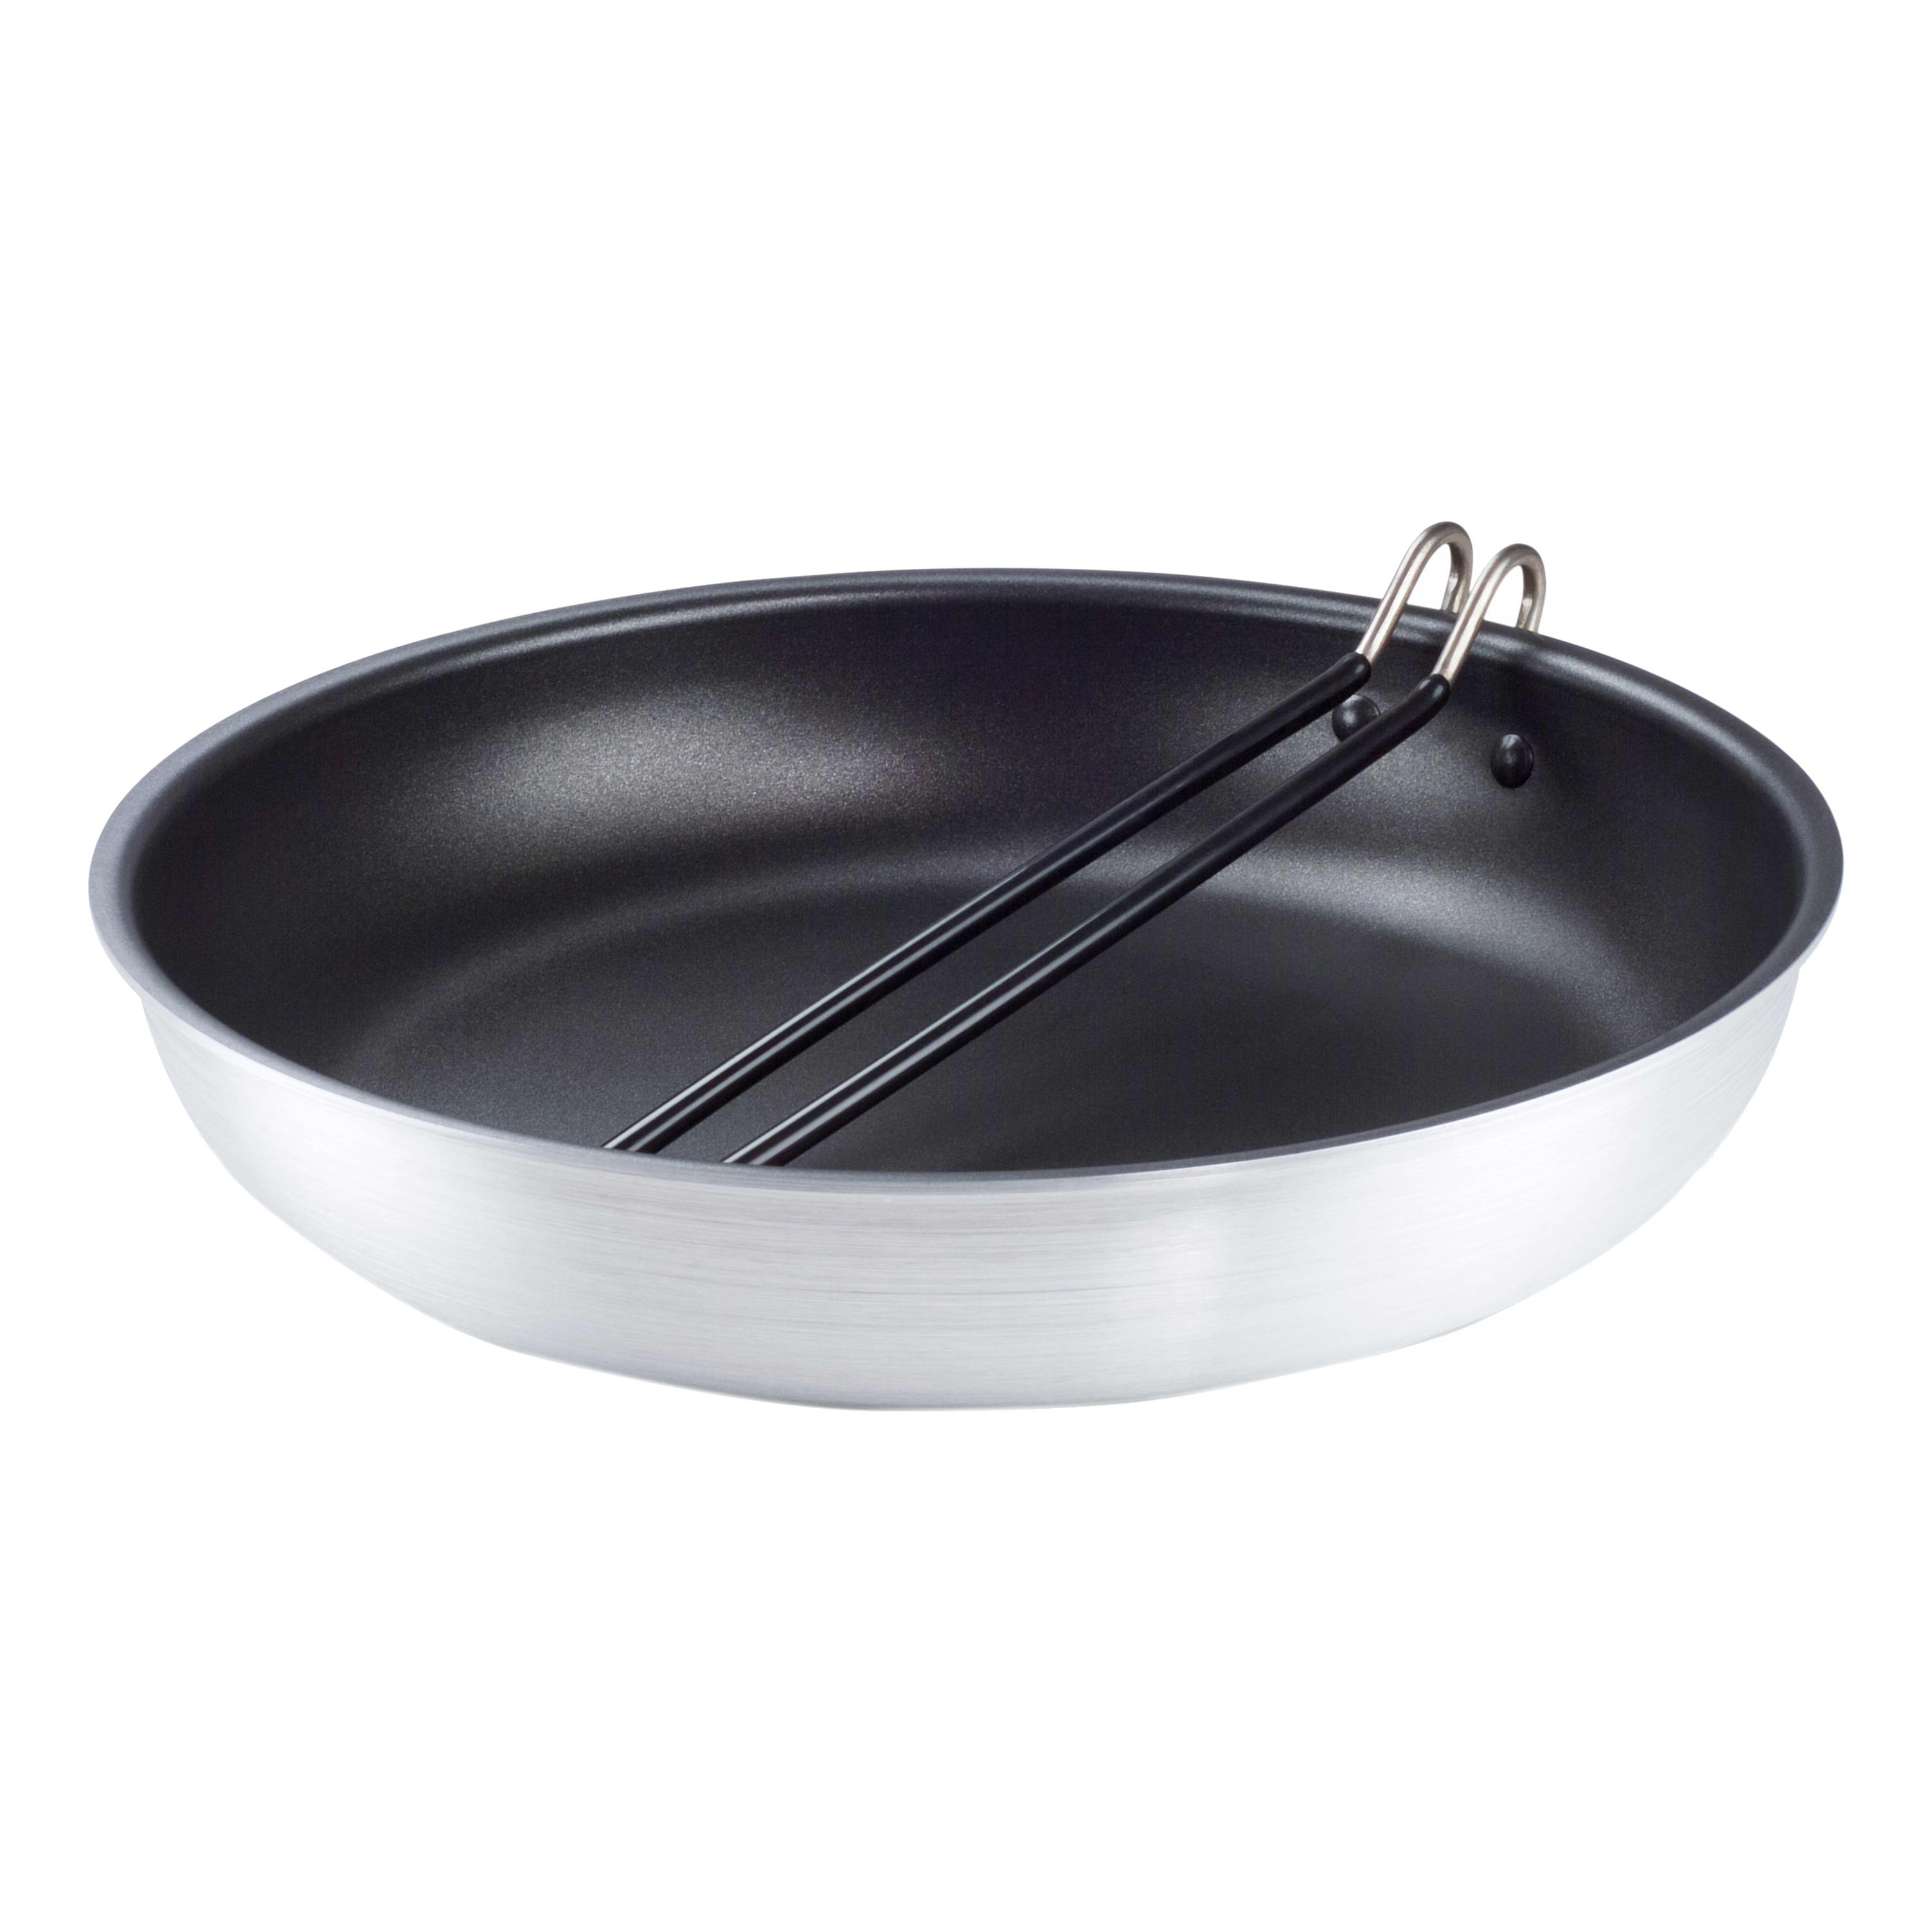 GSI Outdoors Bugaboo Frypan - Handle Folded for Storage